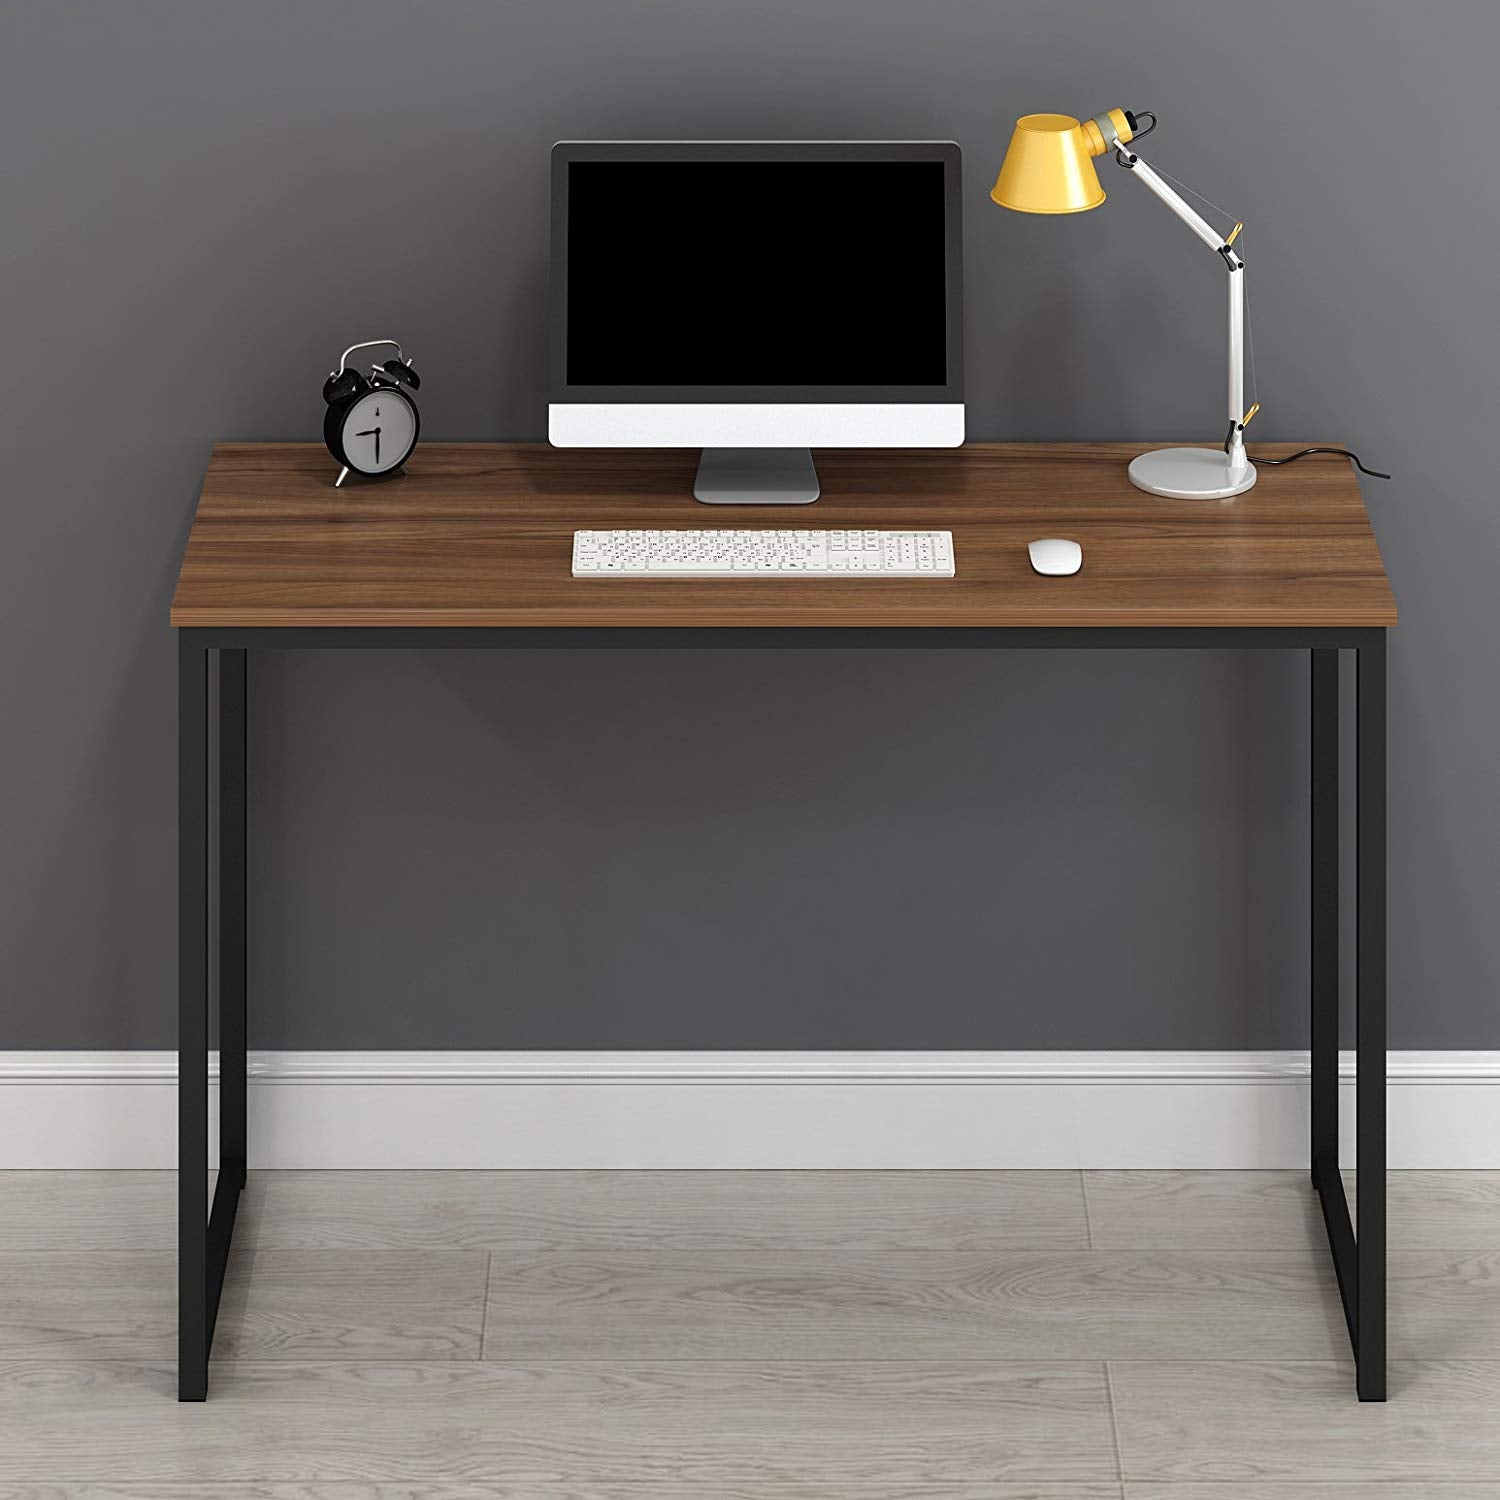 Modern Compact Desk Table Computer Workstation PC Table 120 X 76 X 45 CM